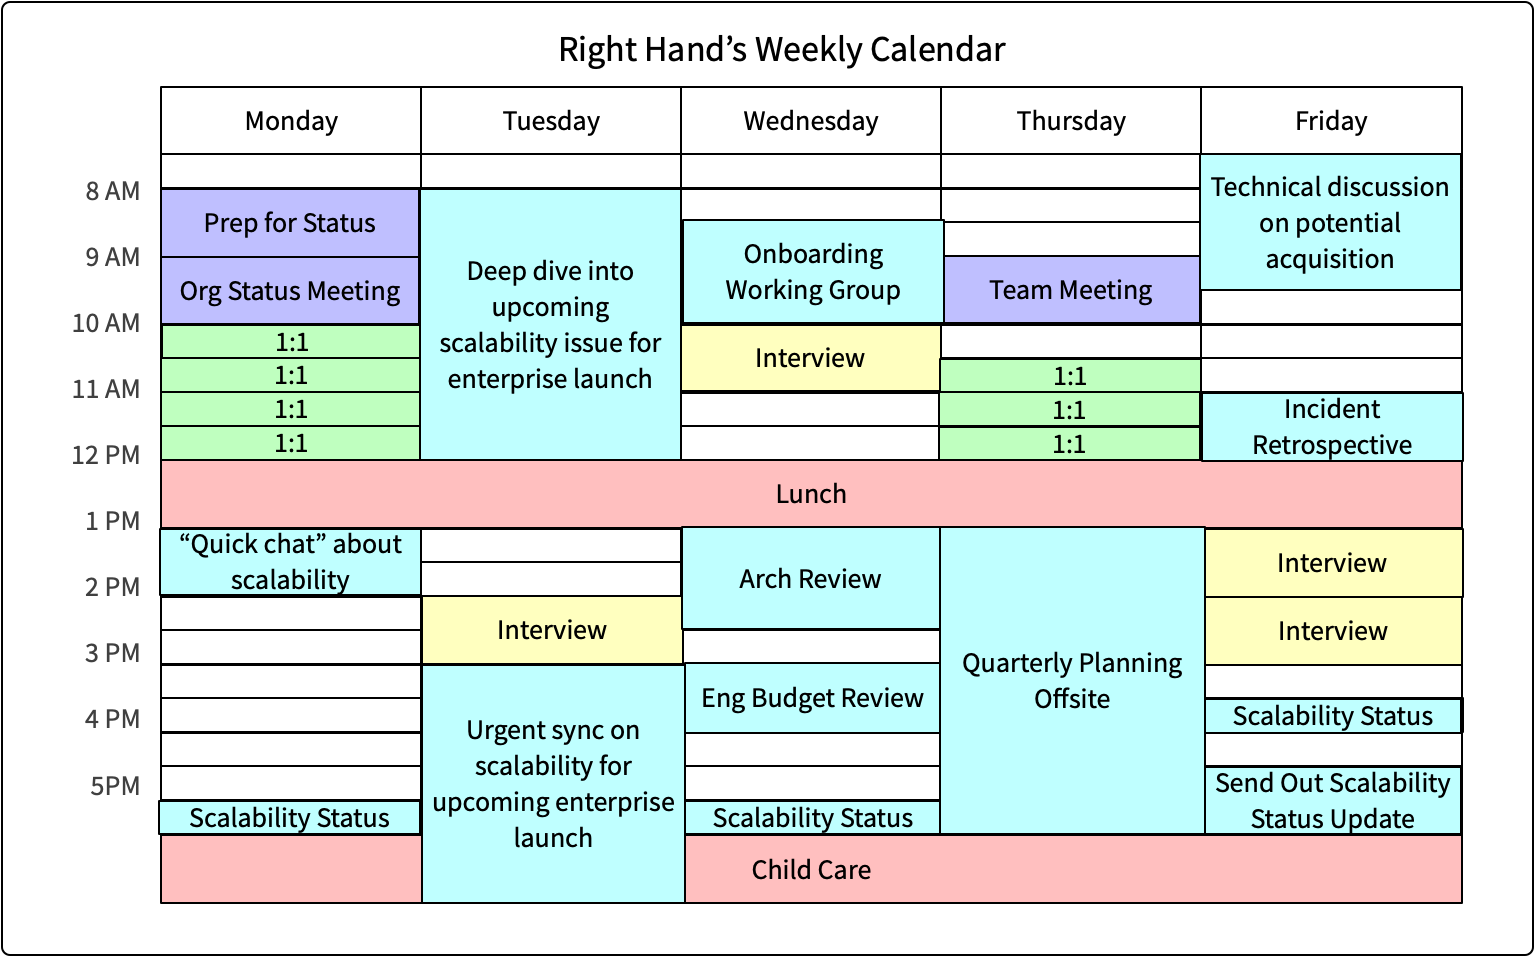 Example calendar for Right Hand archetype